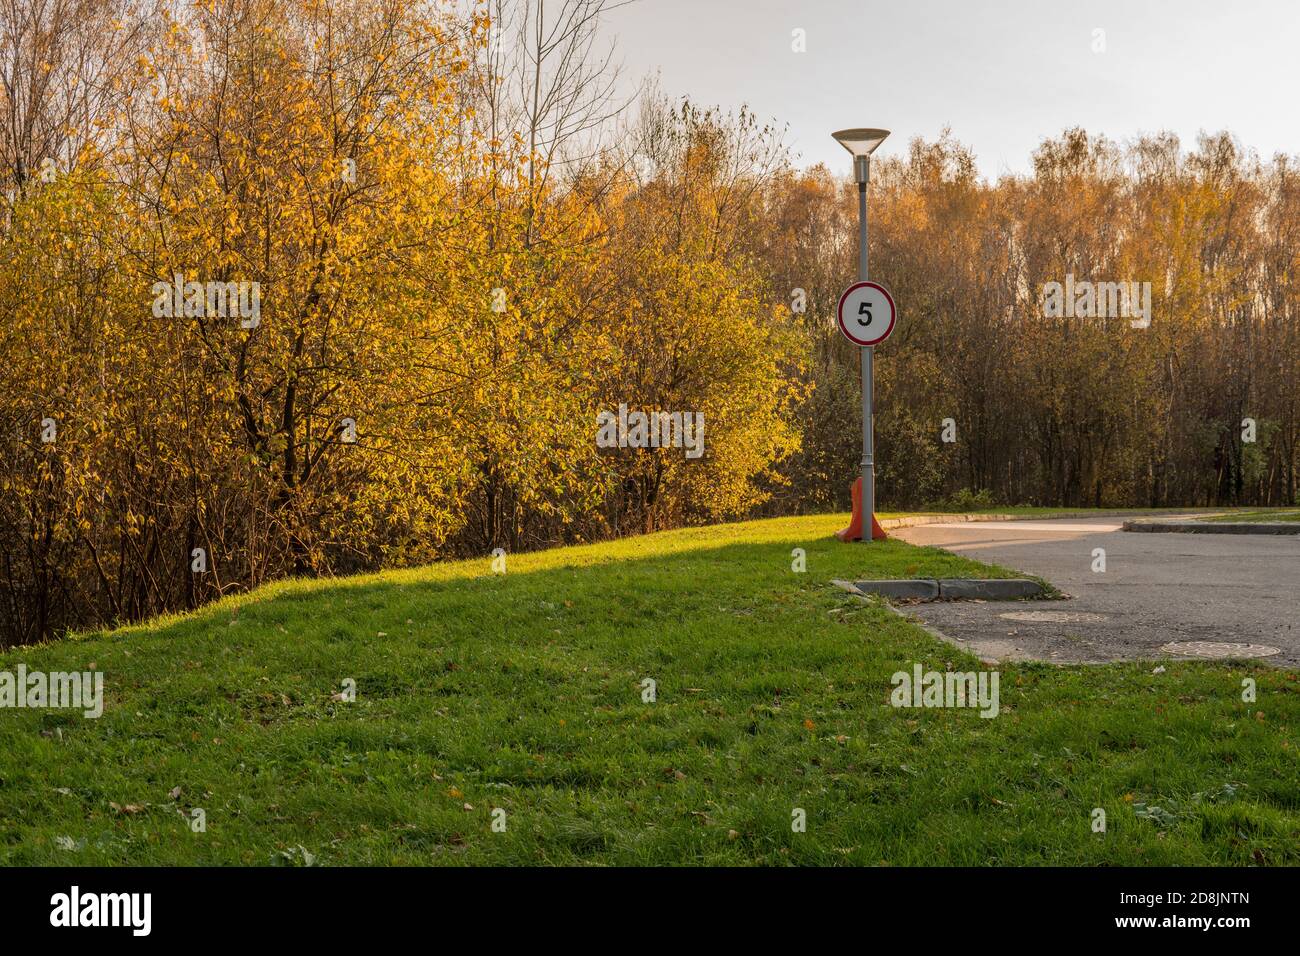 Road sign on the background of a golden forest in a circle of red number, autumn meadow, green grass bright sunlight asphalt road in the shade Stock Photo